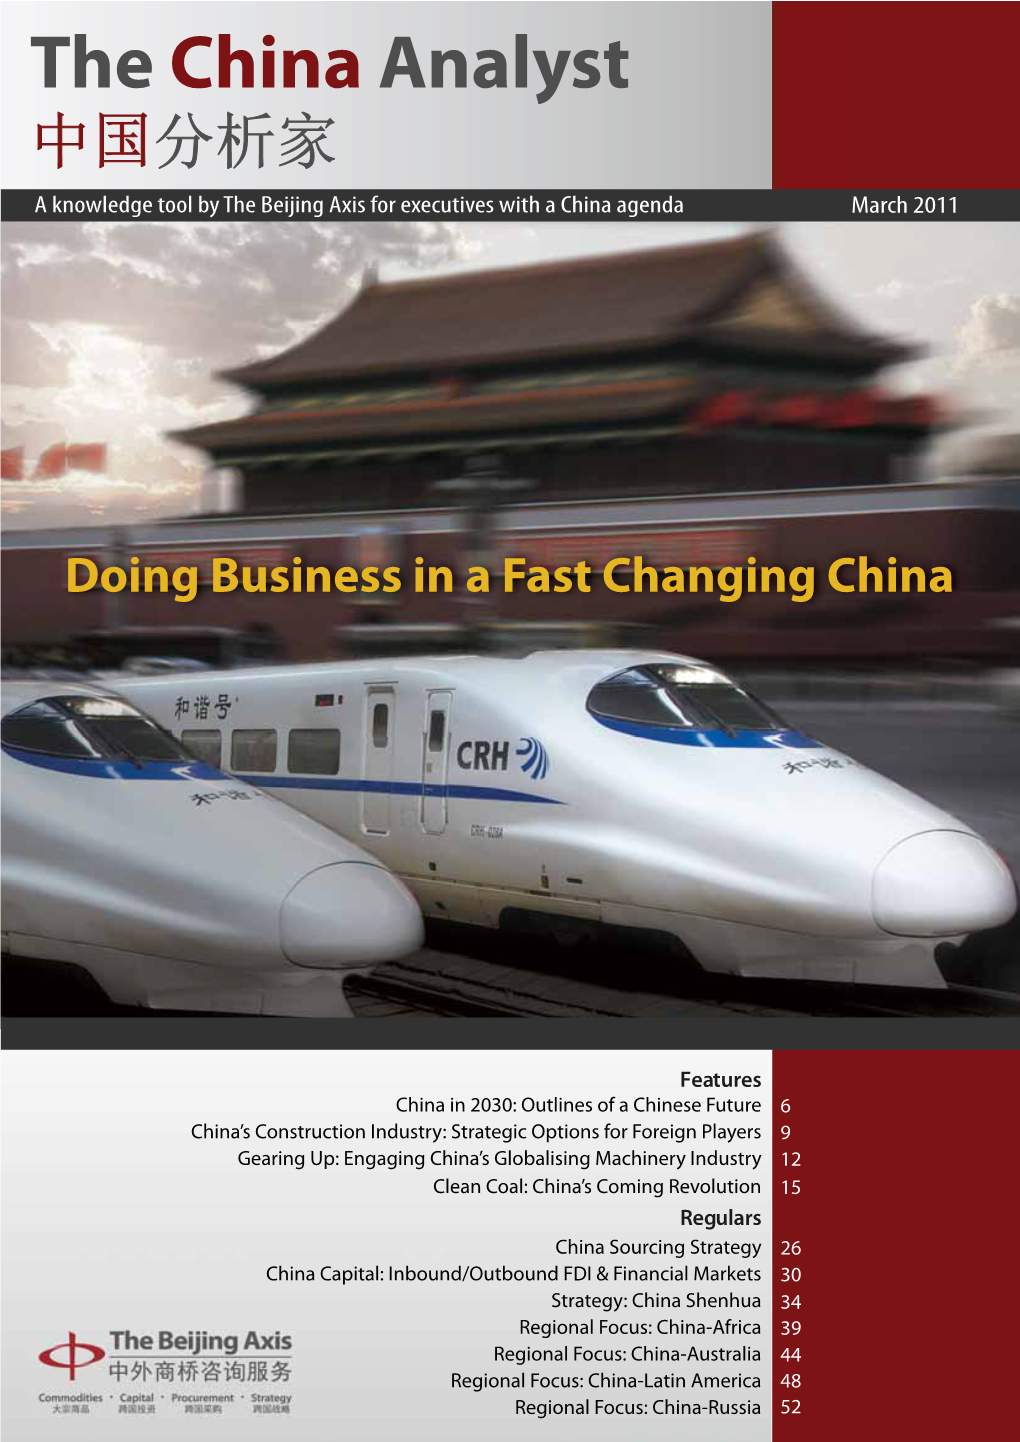 The China Analyst 中国分析家 a Knowledge Tool by the Beijing Axis for Executives with a China Agenda March 2011